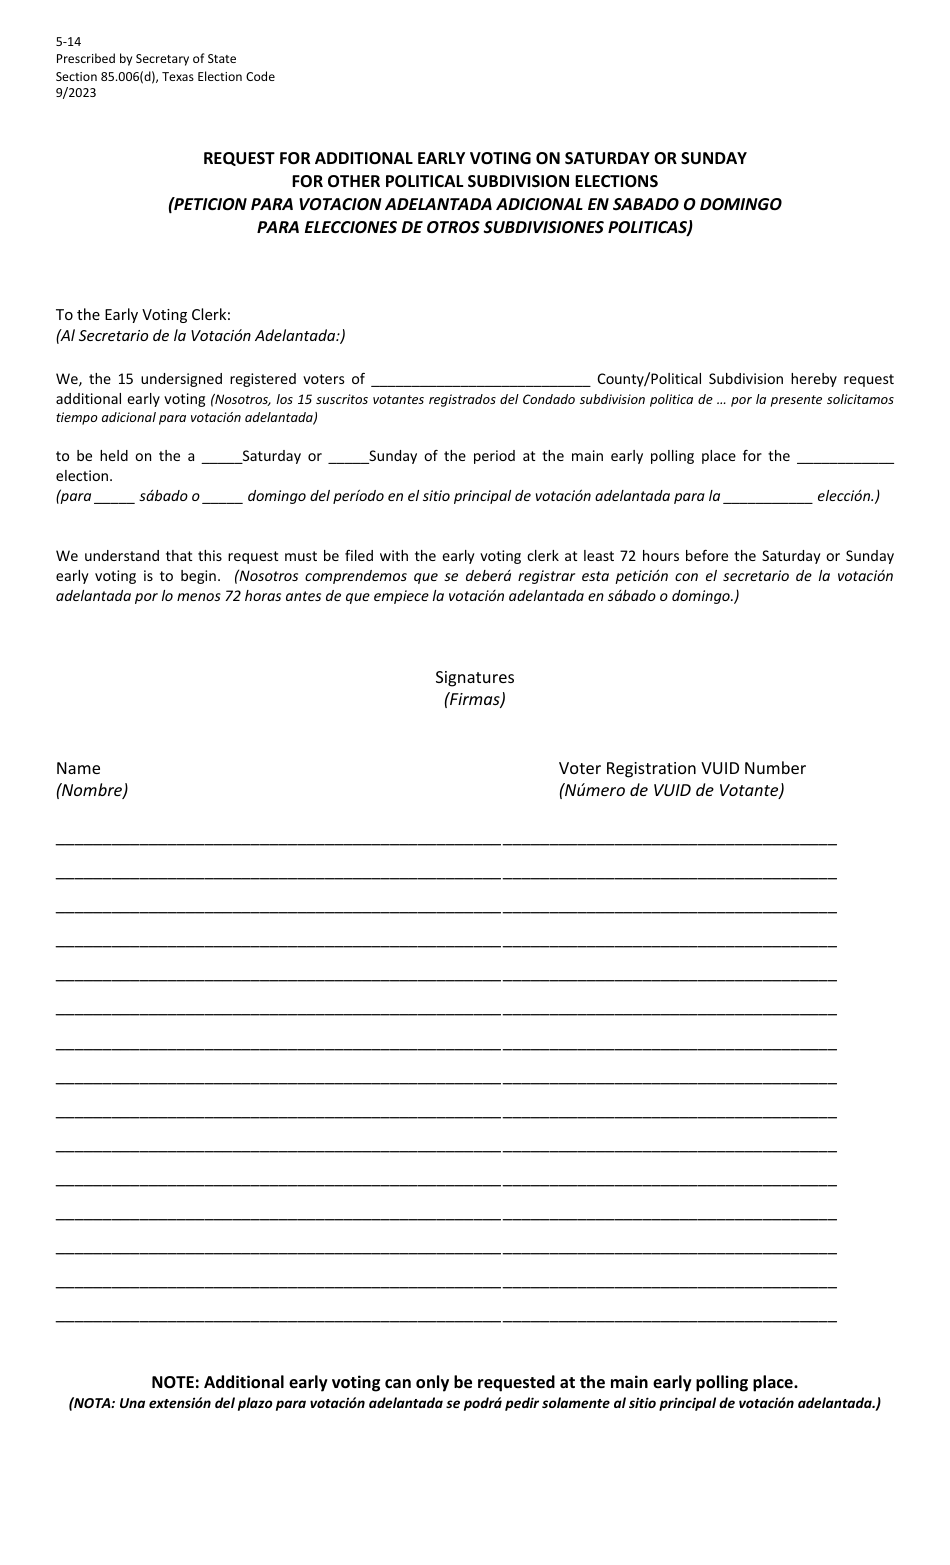 Form 5-14 Request for Additional Early Voting on Saturday or Sunday for Other Political Subdivision Elections - Texas (English / Spanish), Page 1